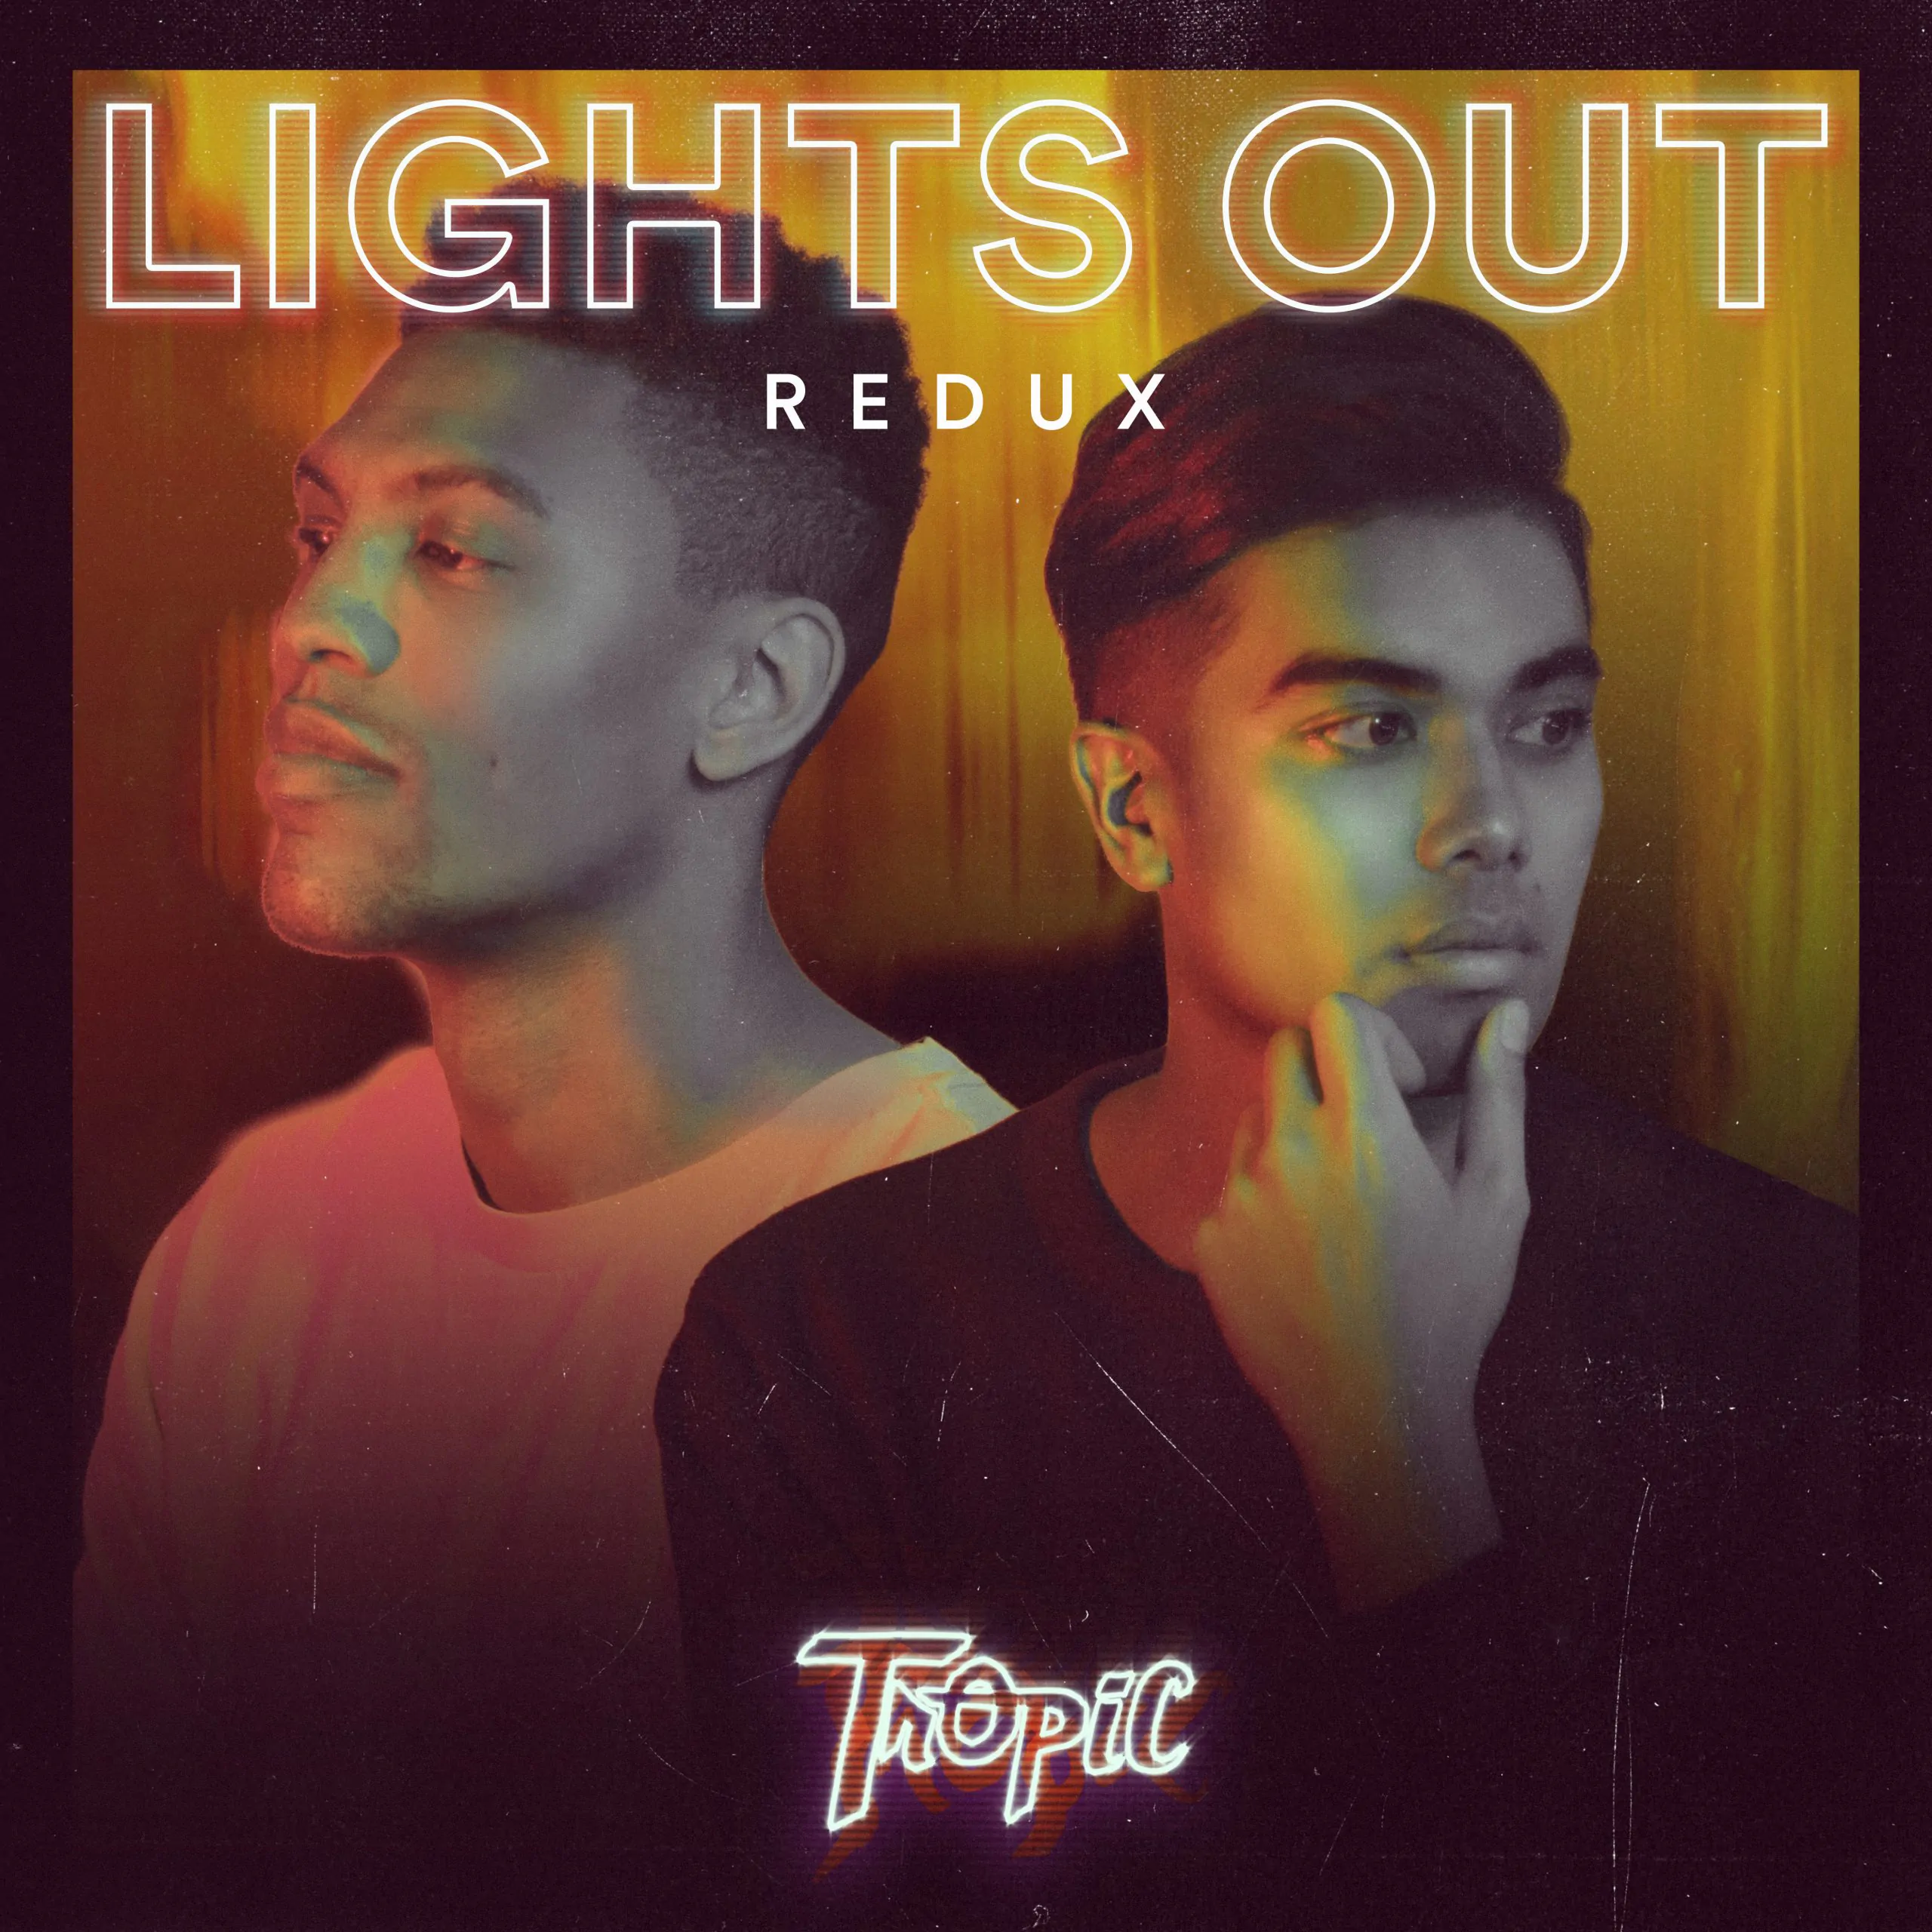 TRACK PREMIERE: Tropic – Lights Out (Redux)